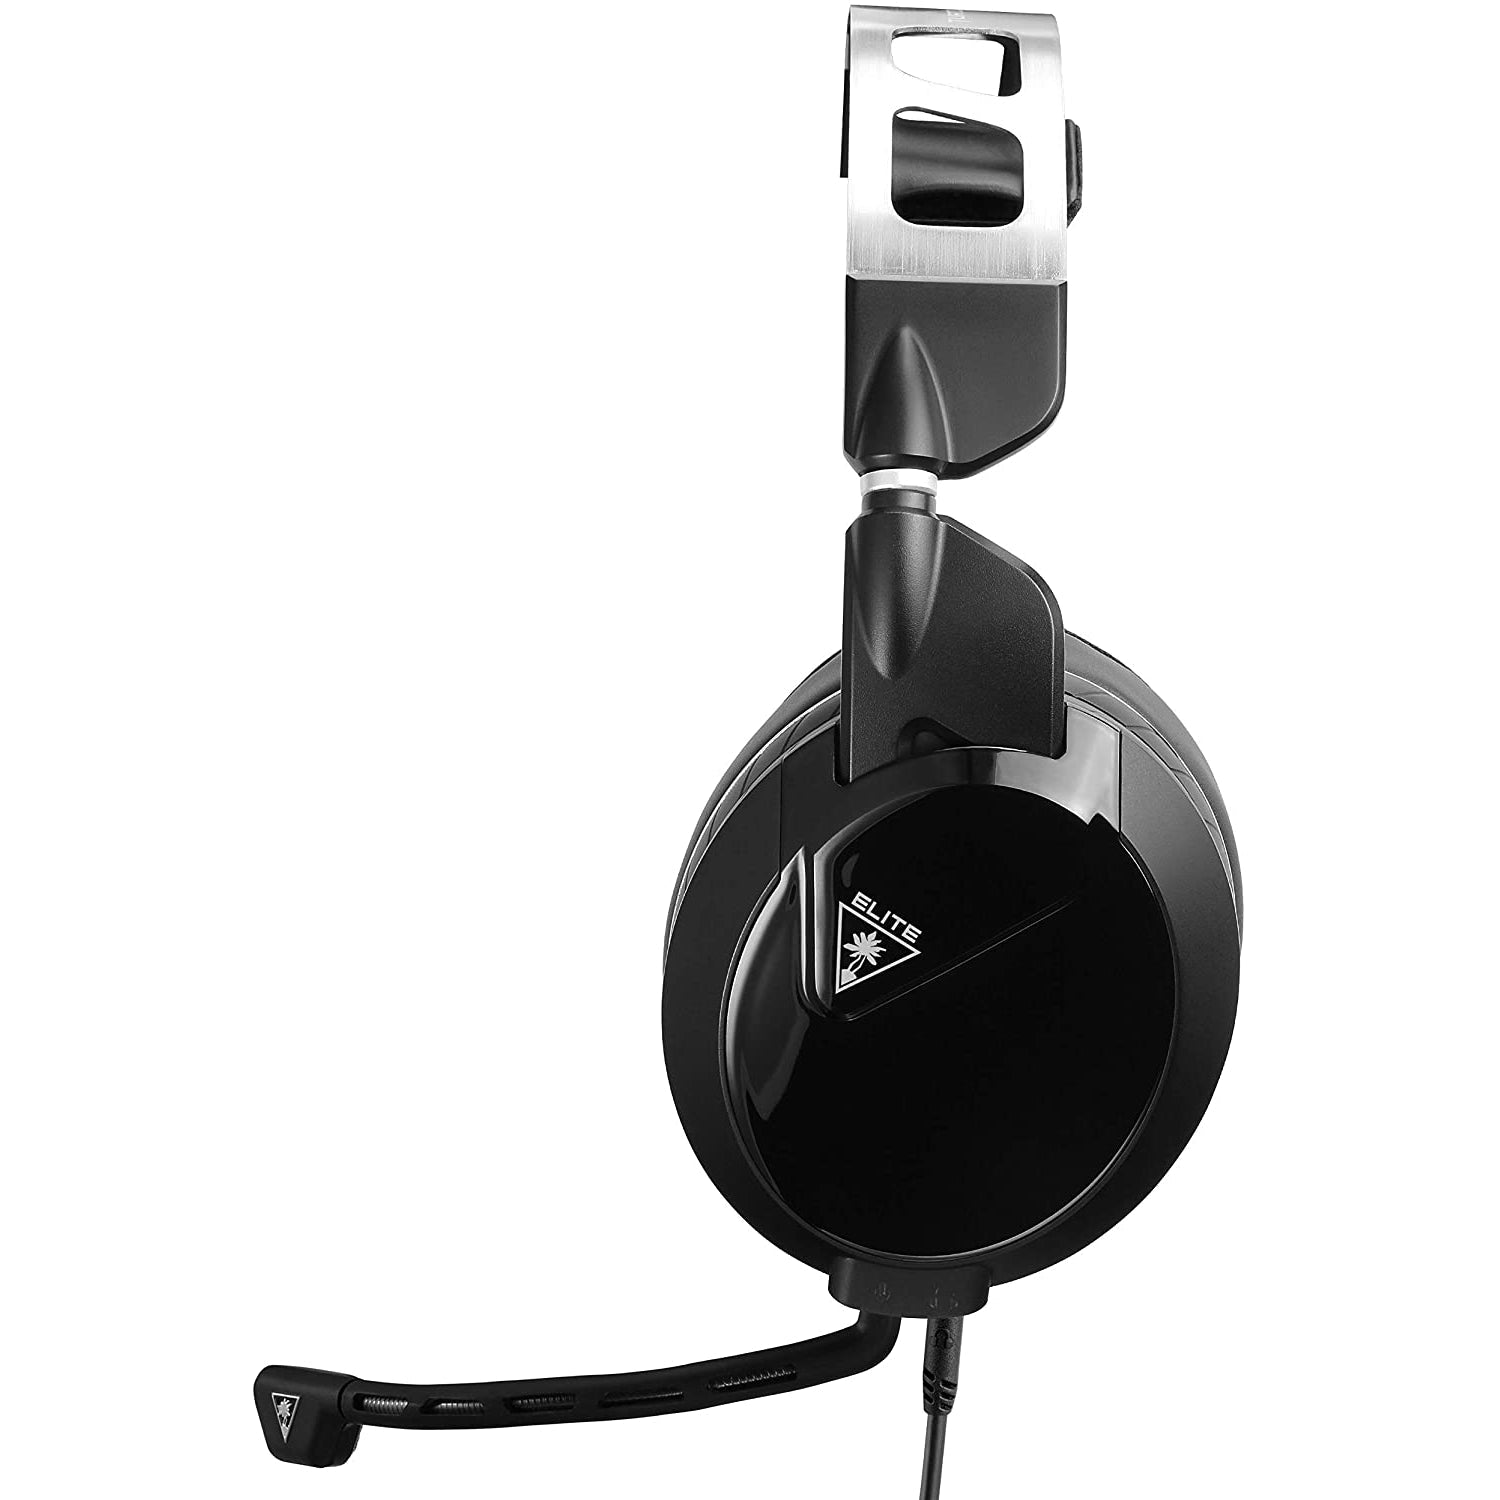 Turtle Beach Elite Pro 2 Gaming Headset and SuperAmp (PS4/PC) - Excellent